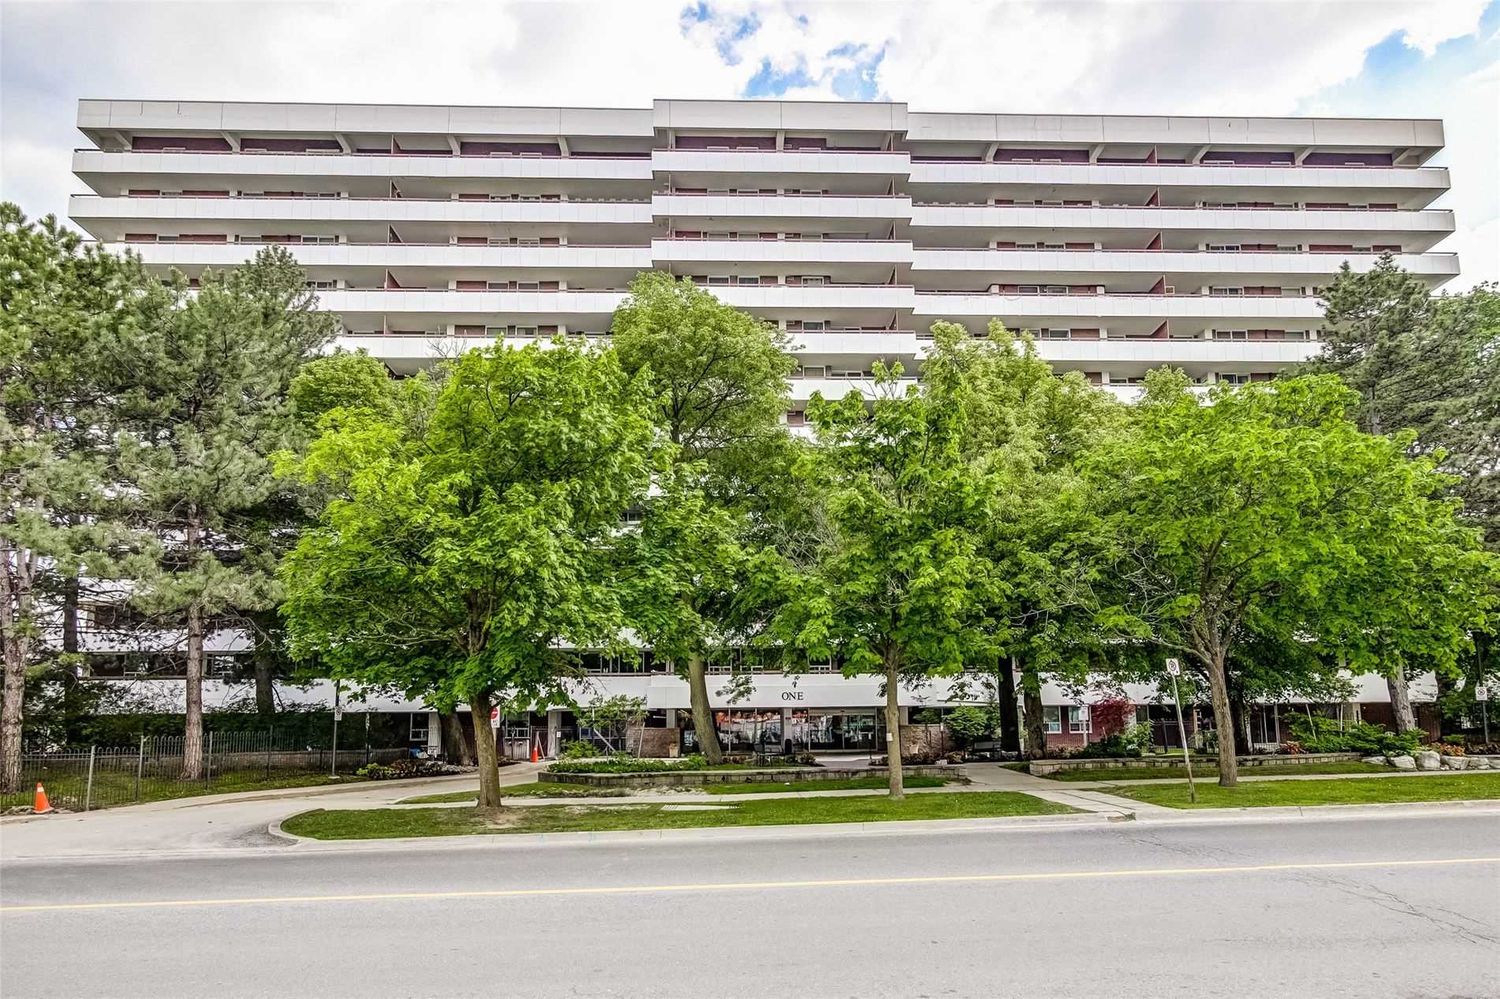 1 Royal Orchard Boulevard. 1 Royal Orchard Condos is located in  Markham, Toronto - image #1 of 3